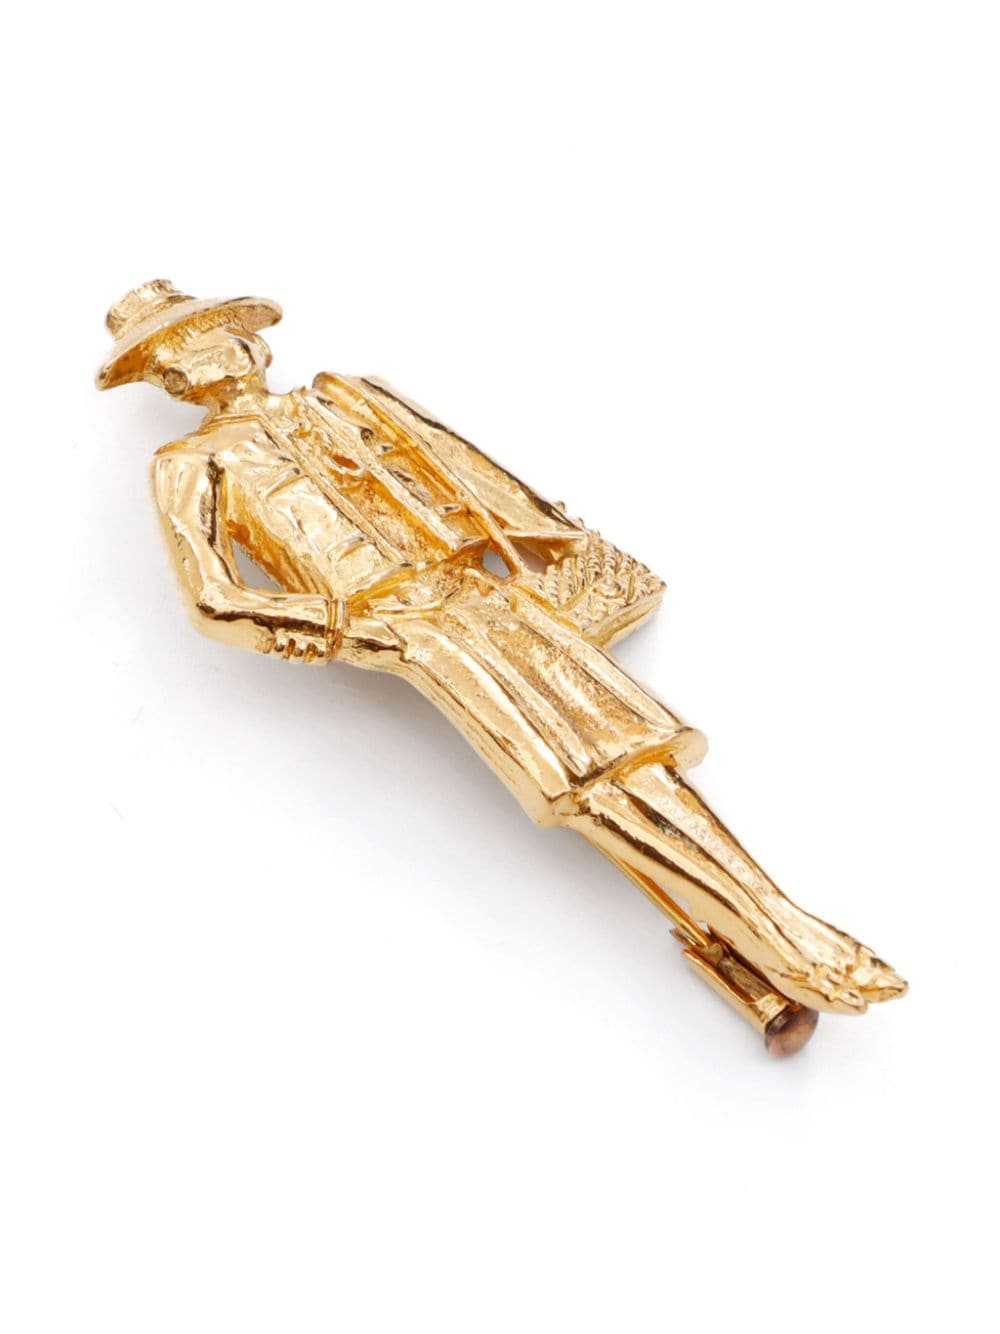 CHANEL Pre-Owned 1981-1985 Mademoiselle brooch - … - image 2